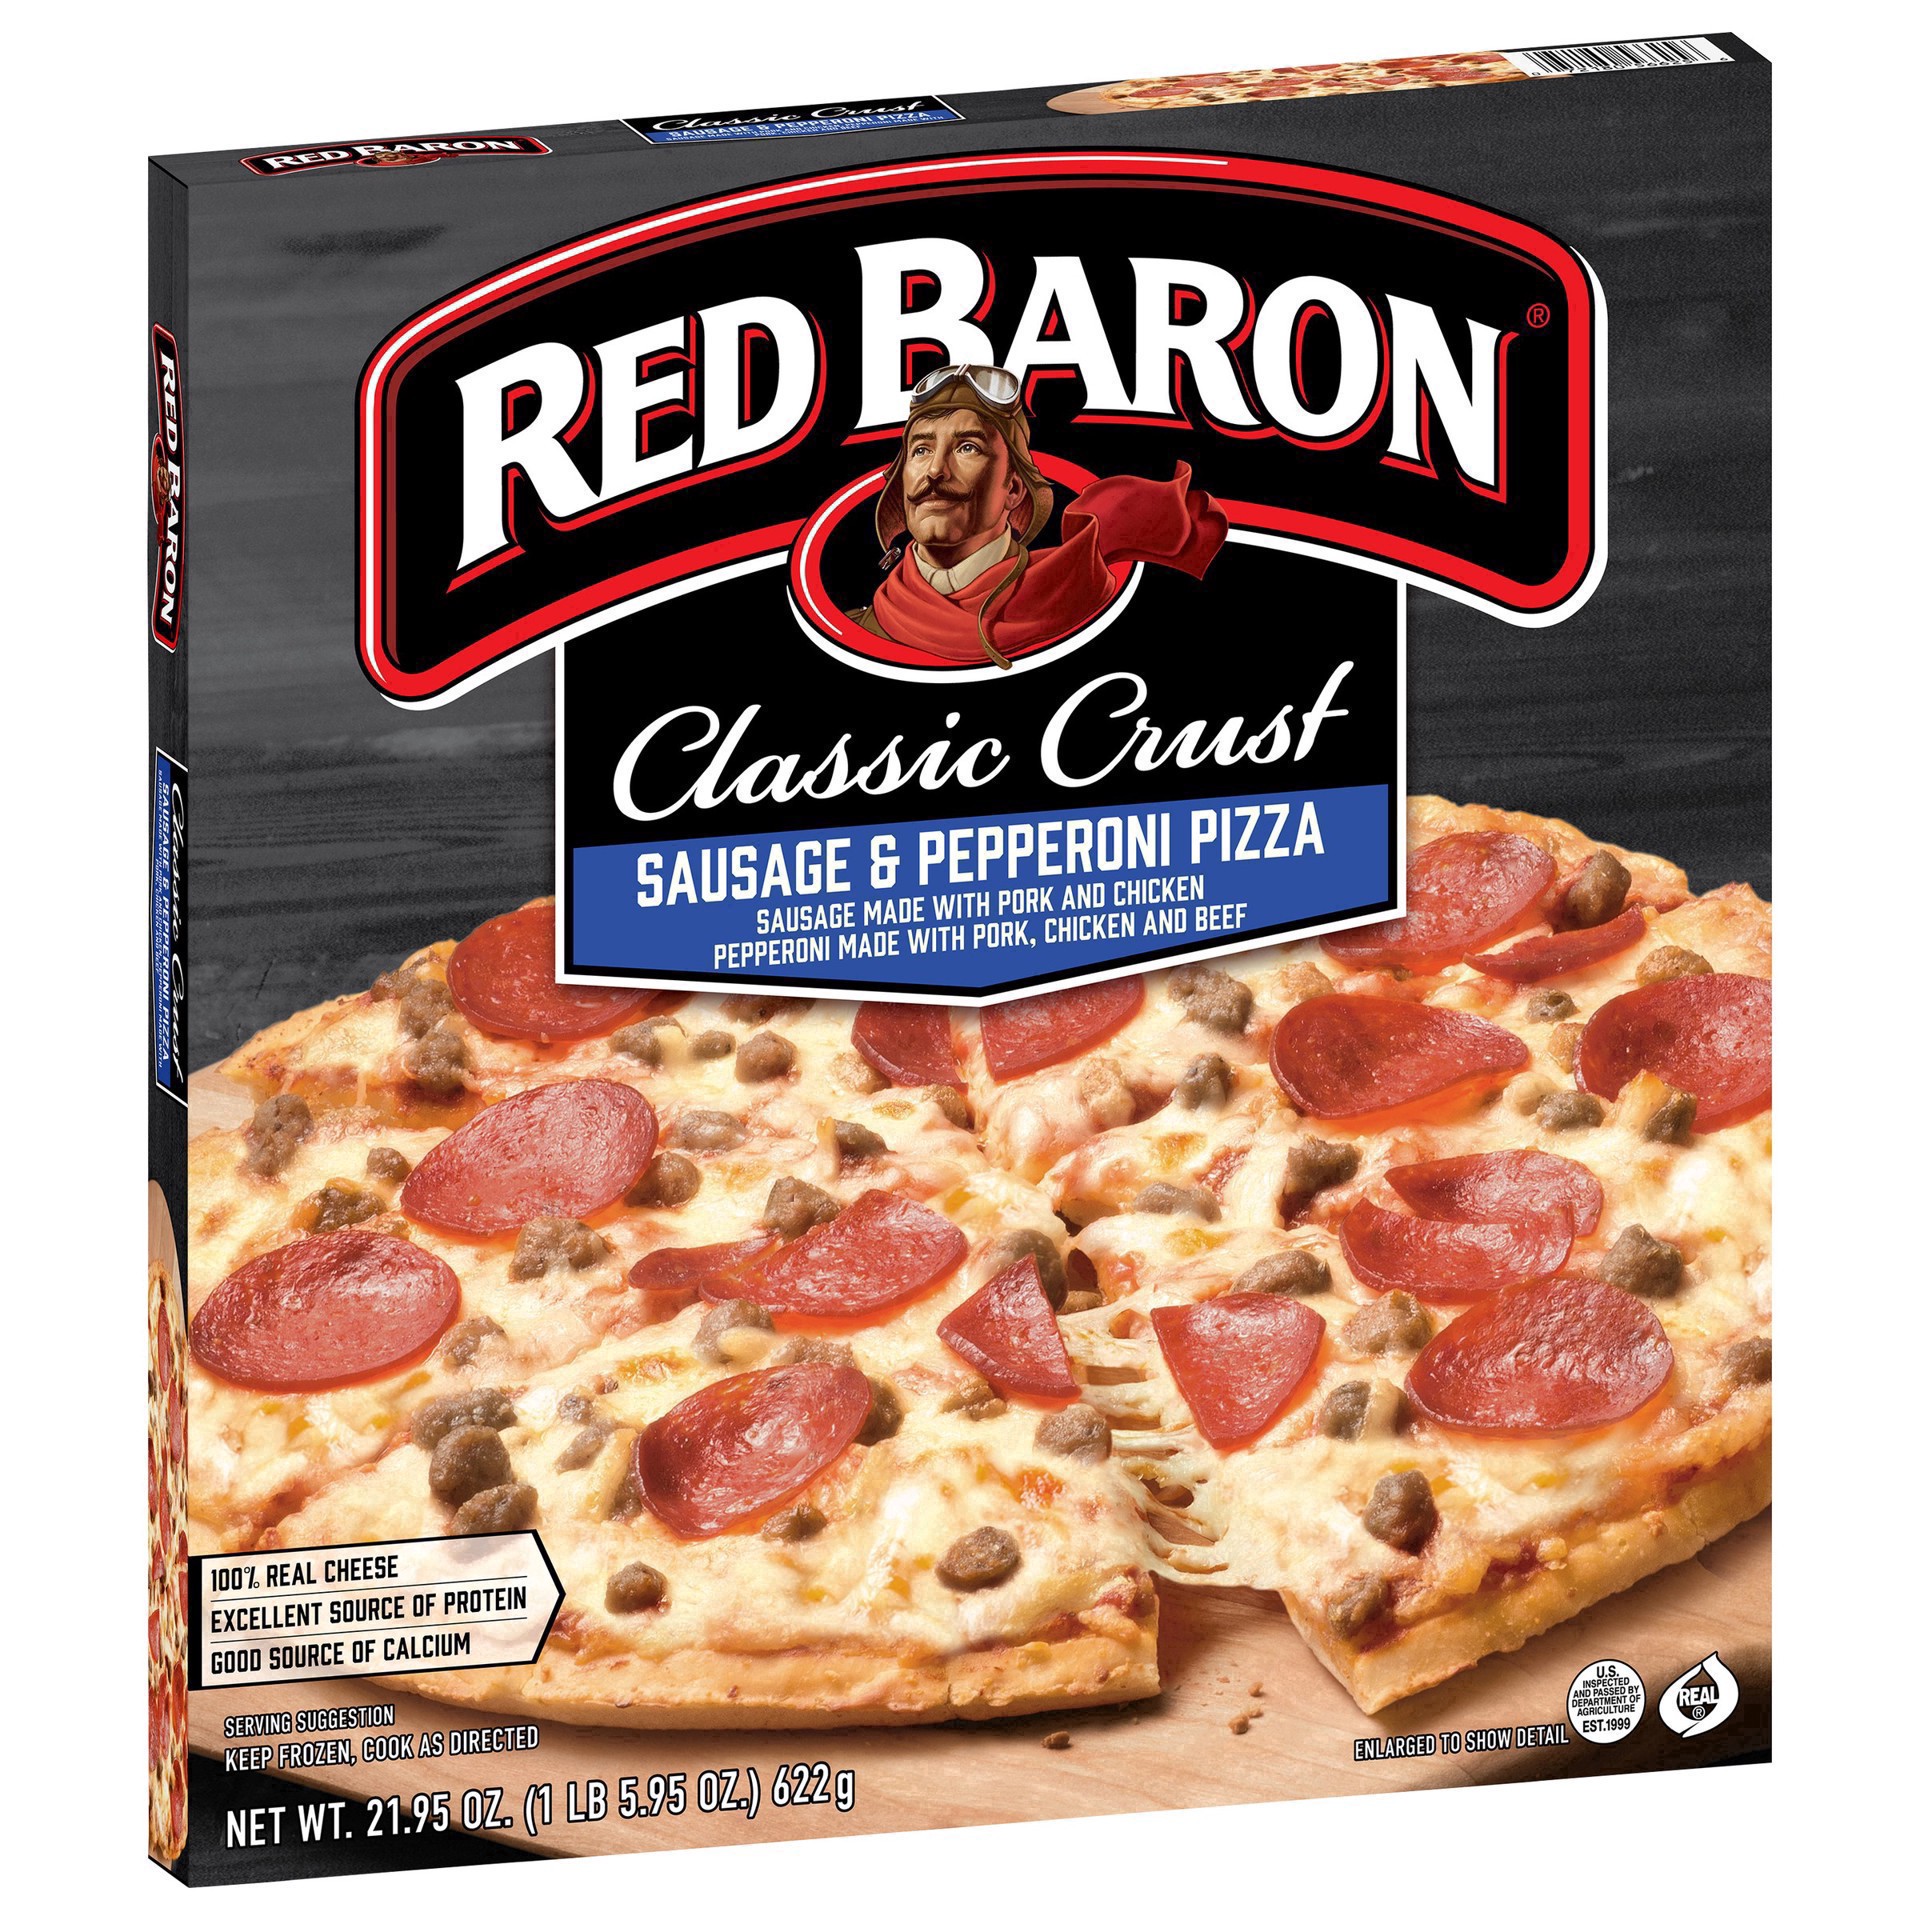 slide 34 of 49, Red Baron Frozen Pizza Classic Crust Sausage & Pepperoni, 21.95 oz